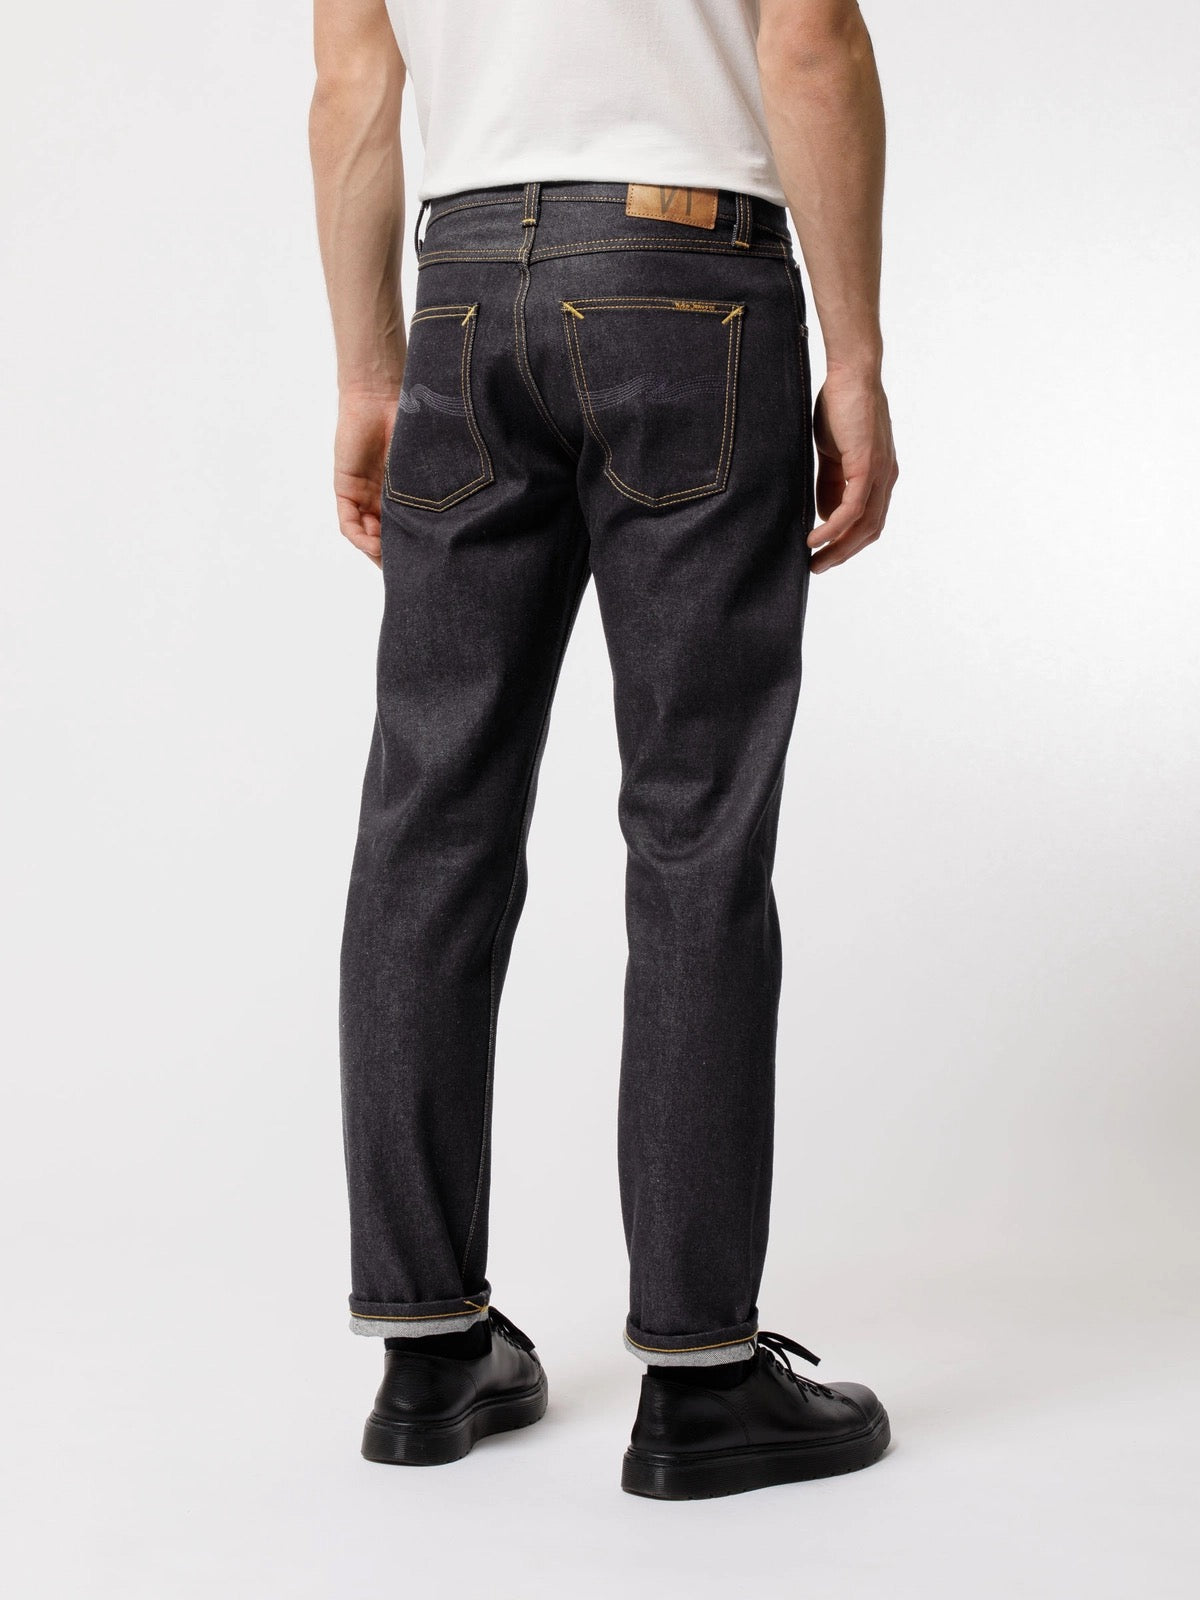 Nudie - Gritty Jackson - Dry Maze Selvage